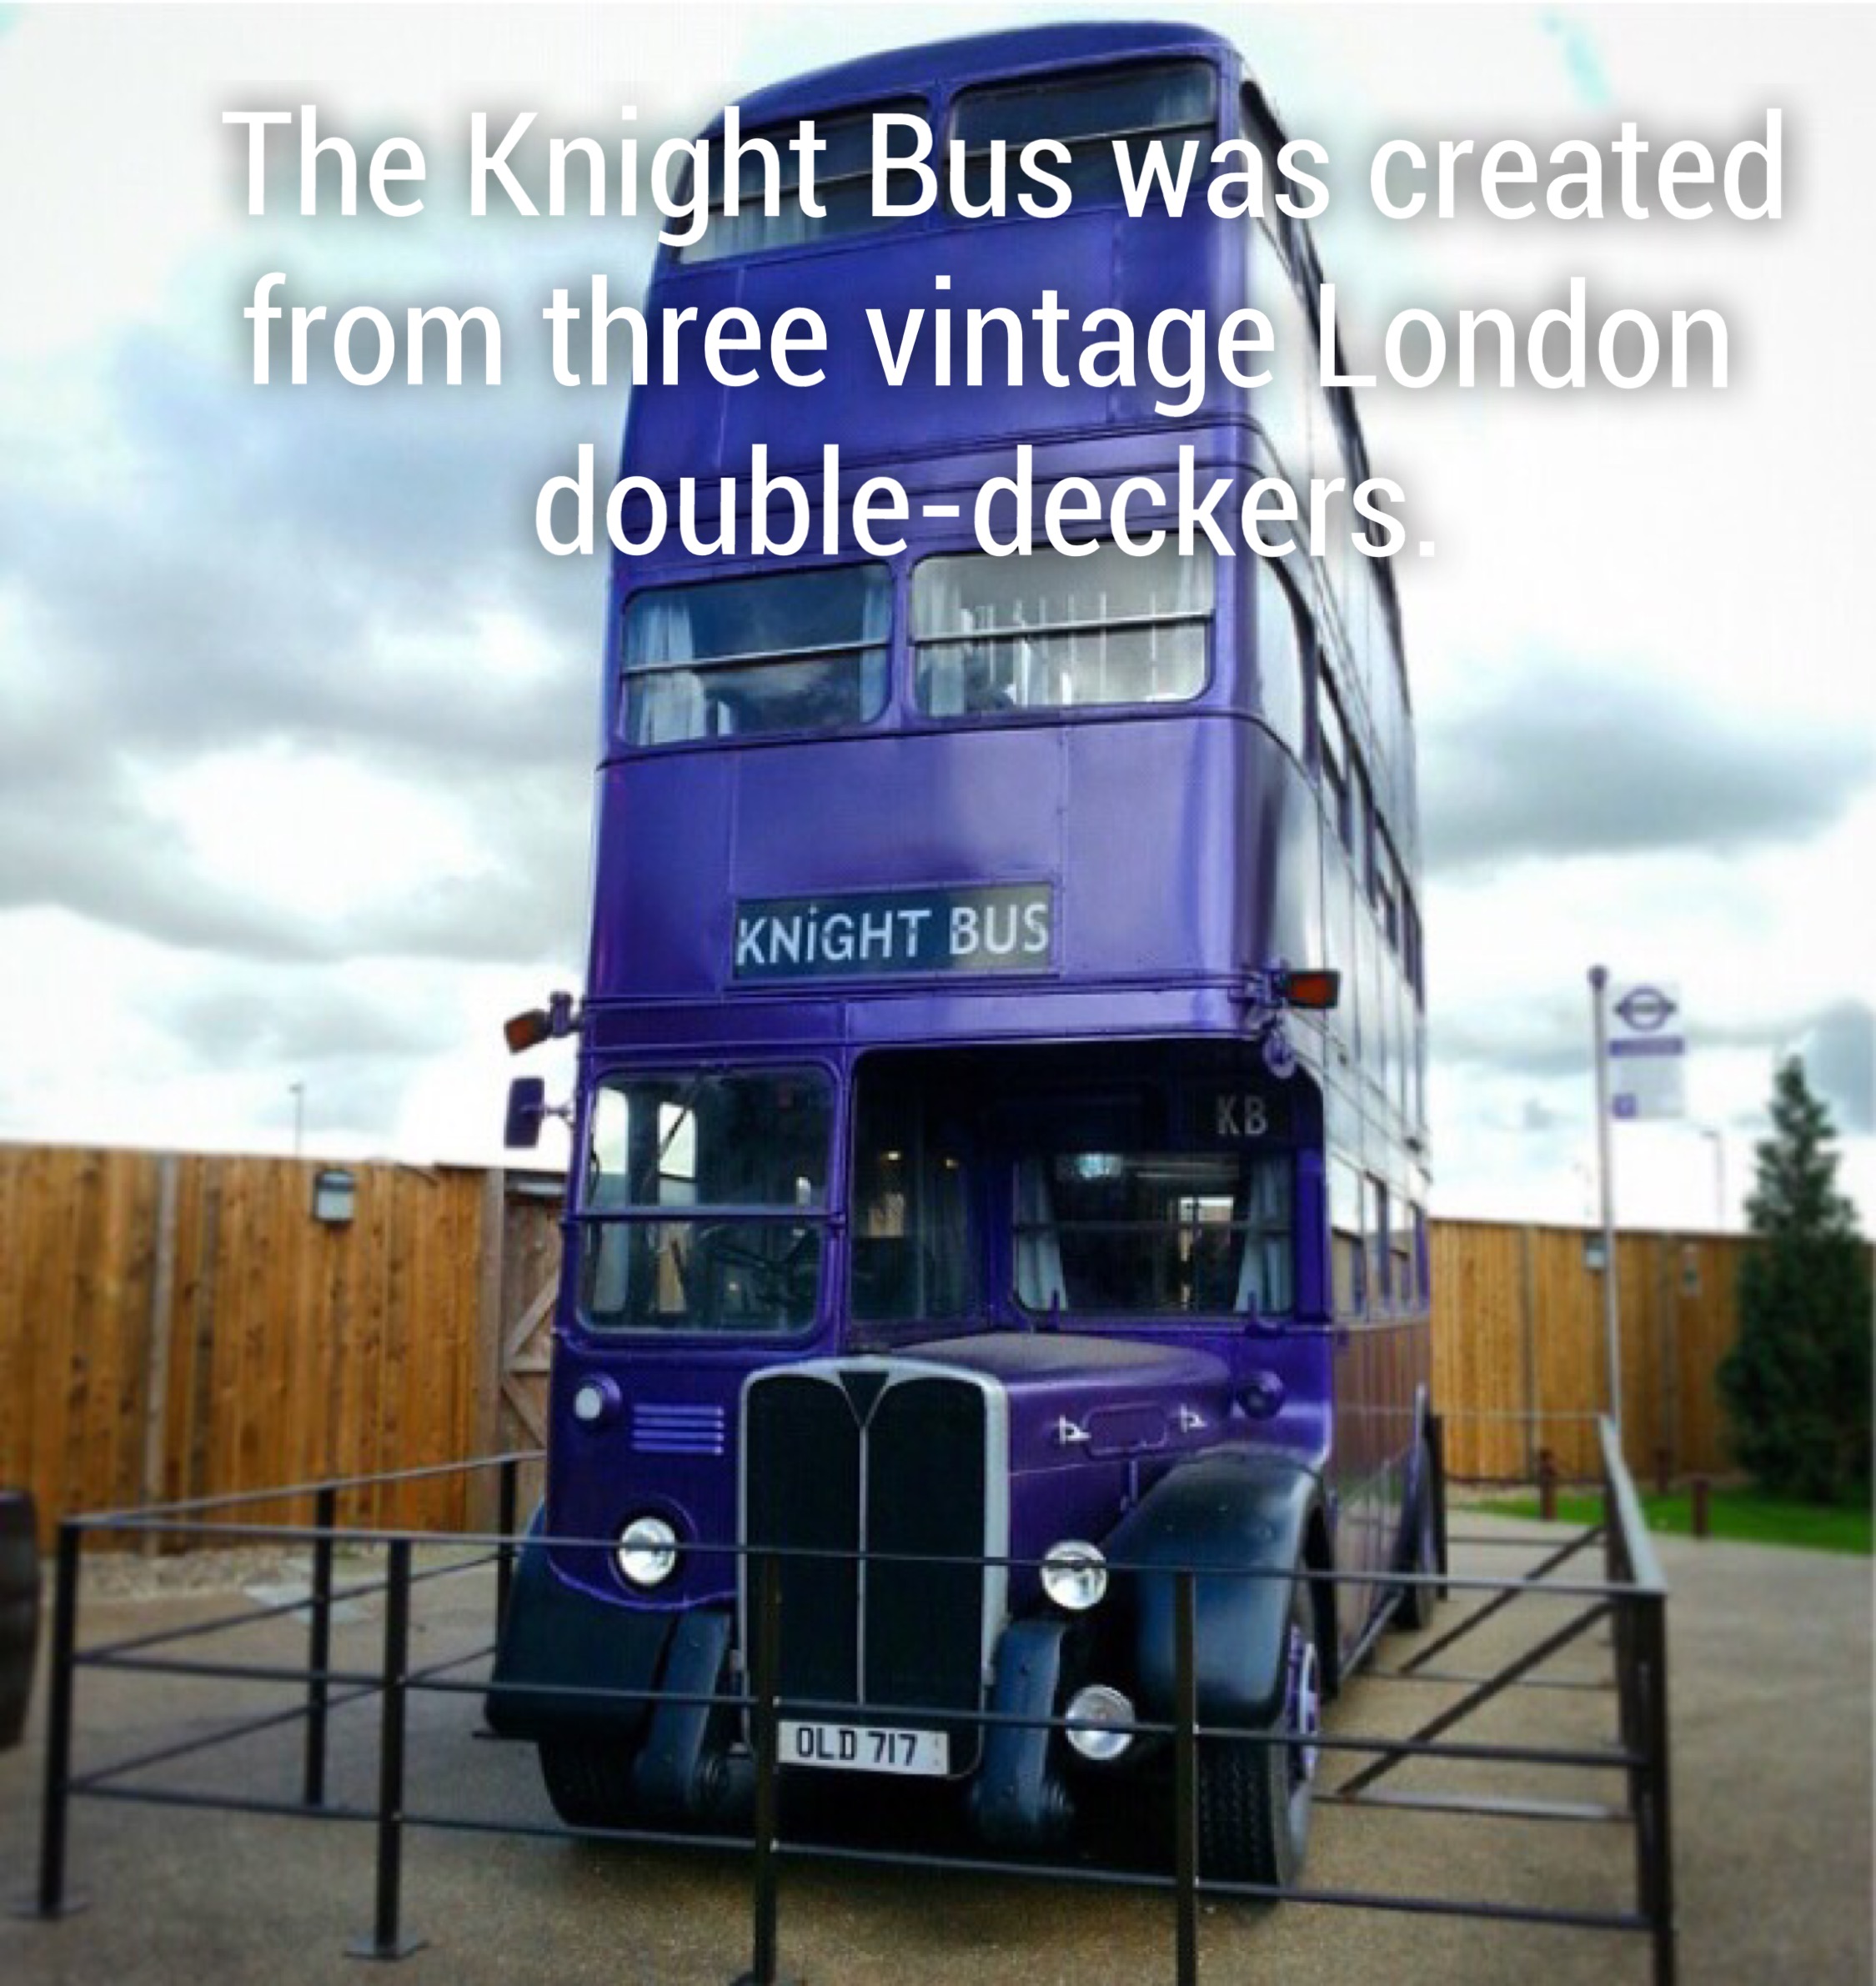 double decker bus - The Knight Bus was created from three vintage London doubledeckers ra Knight Bus Old 717